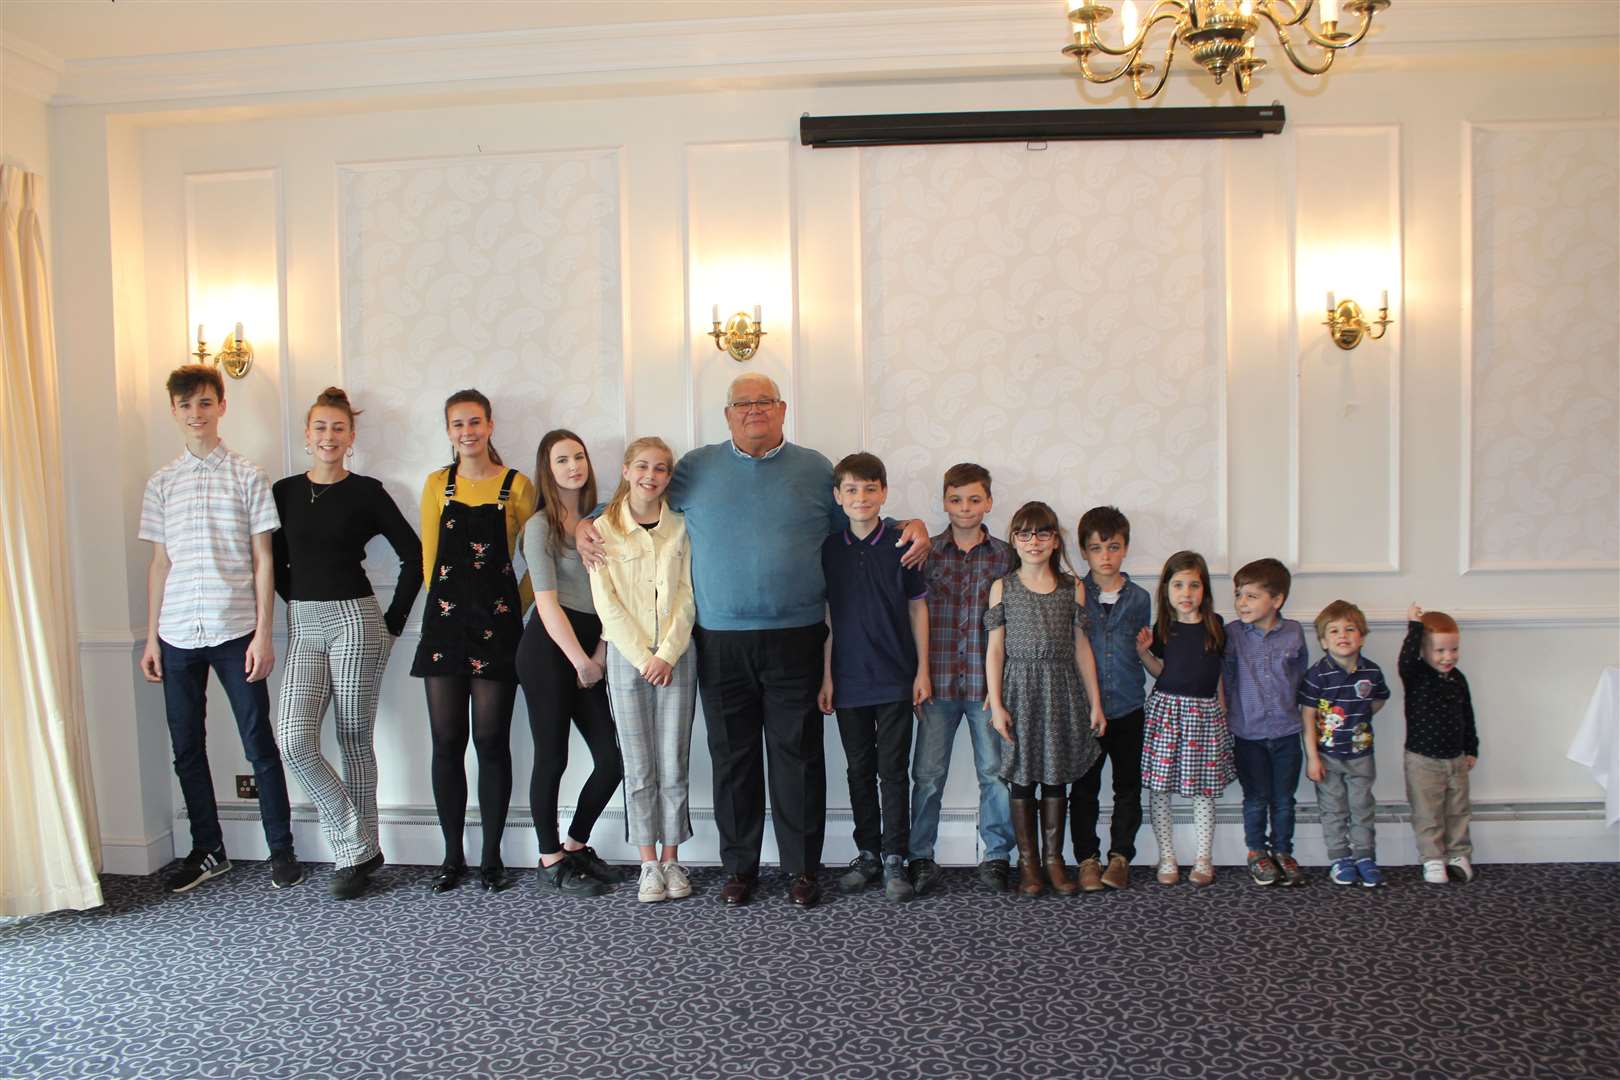 Reg Belcourt with his grandchildren. From left to right: Louis, Sophie, Jessica, Lily, Maddy, Reg, Archie, George, Ava, Elliot, Betsy, Edward, Frank and Rupert